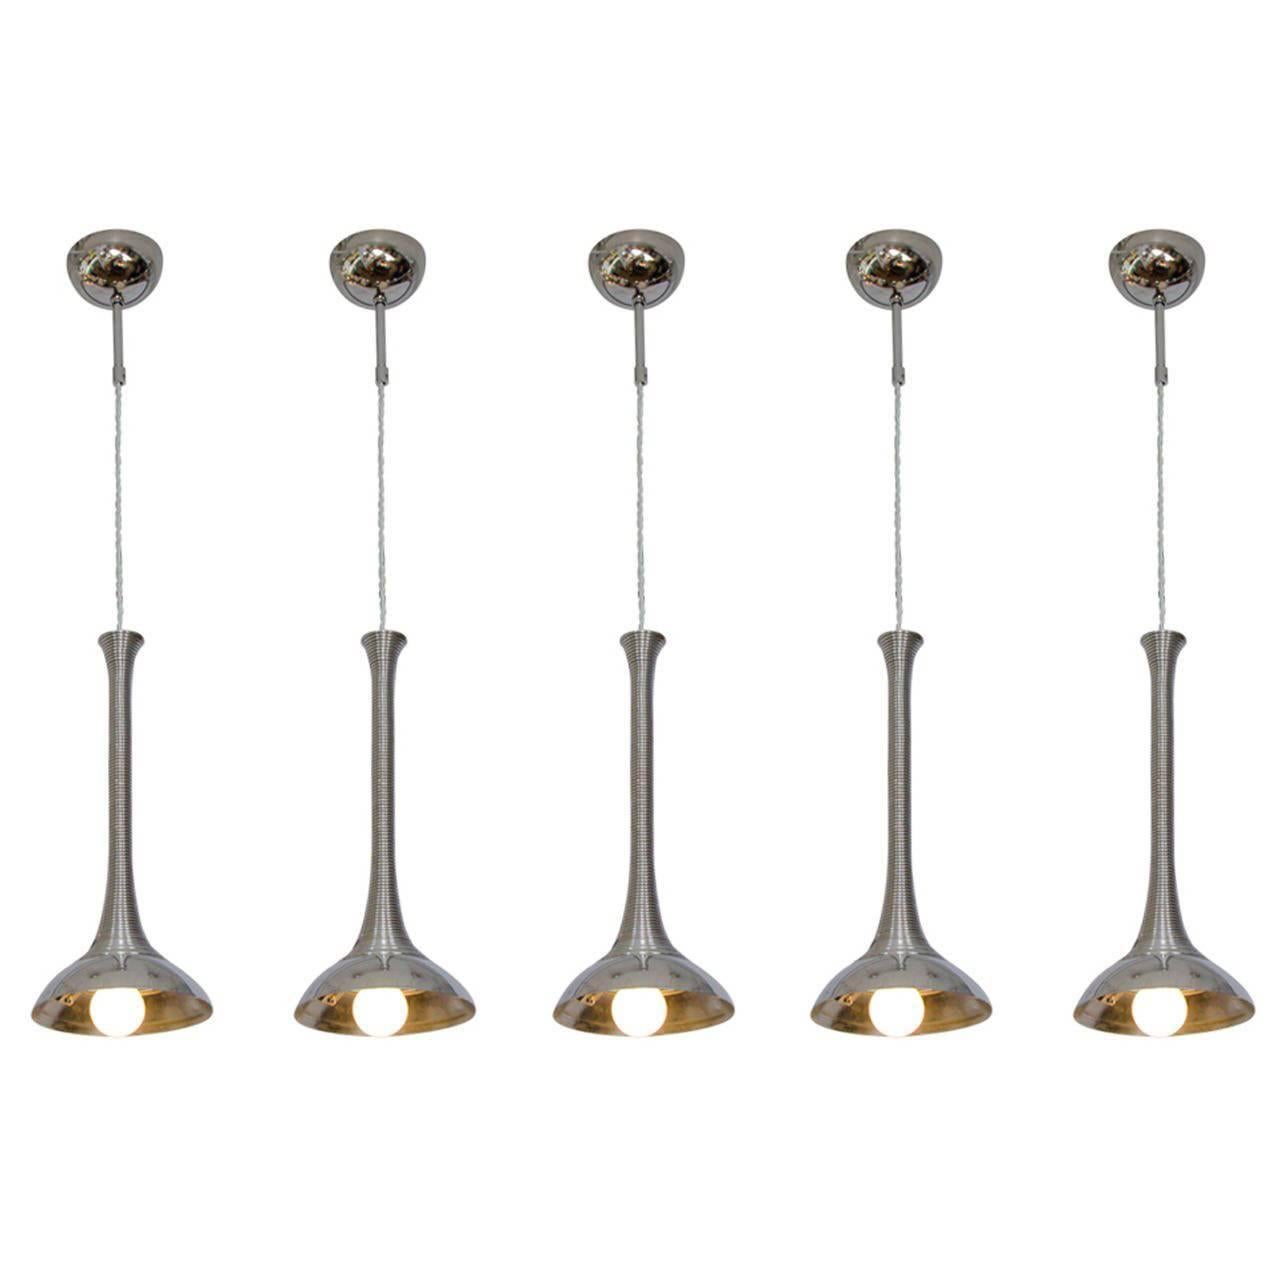 Set of Five Chrome Suspension Spiral Lamps Attributed to Angelo Mangiarotti